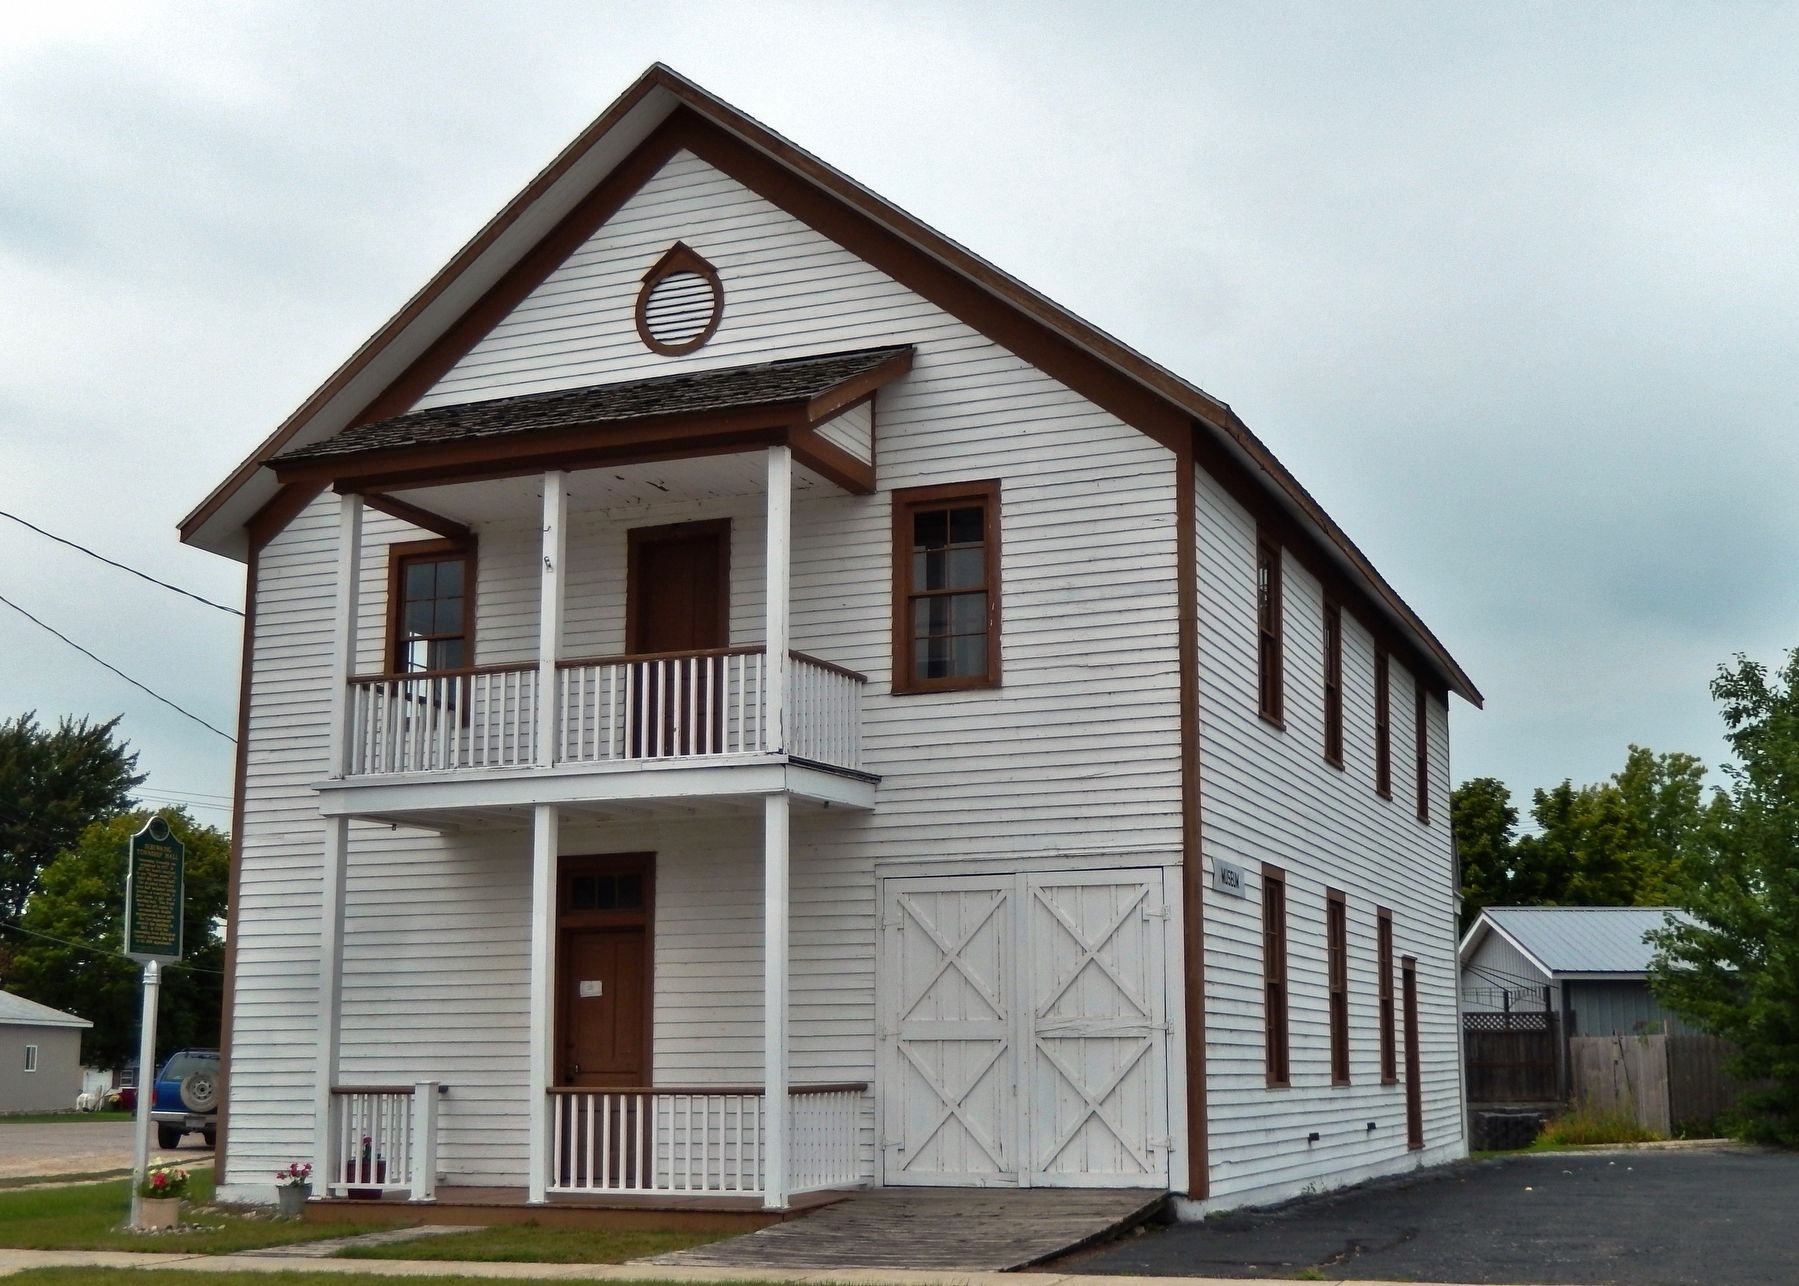 Sebewaing Township Hall (<i>front/east side view; marker visible on left</i>) image. Click for full size.